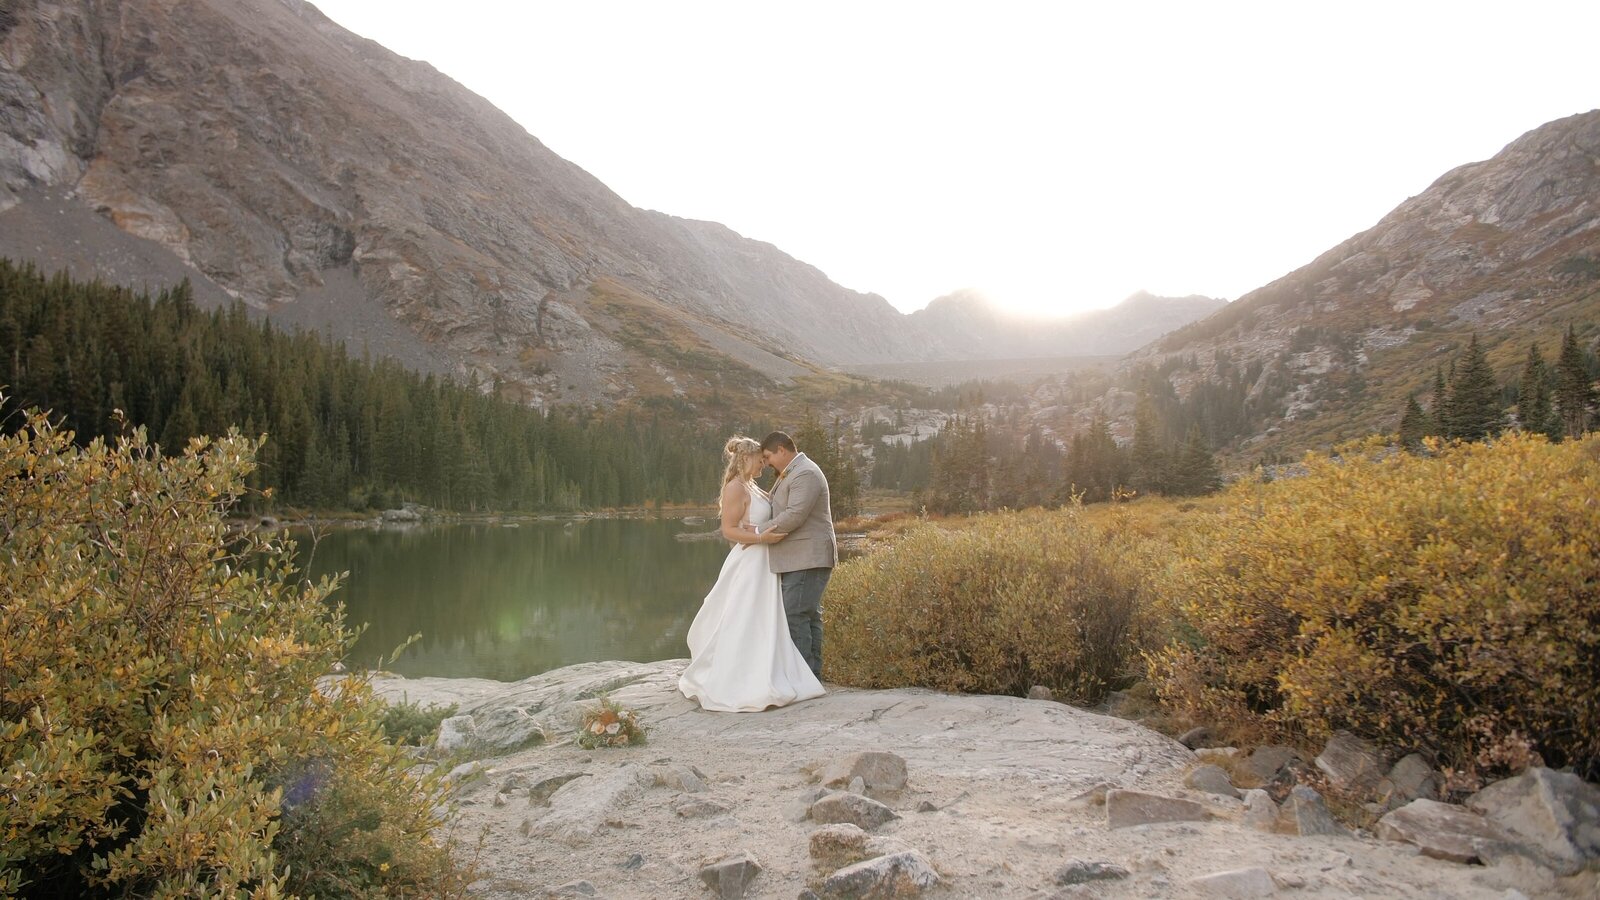 Bride and groom elope together on a mountain in Colorado